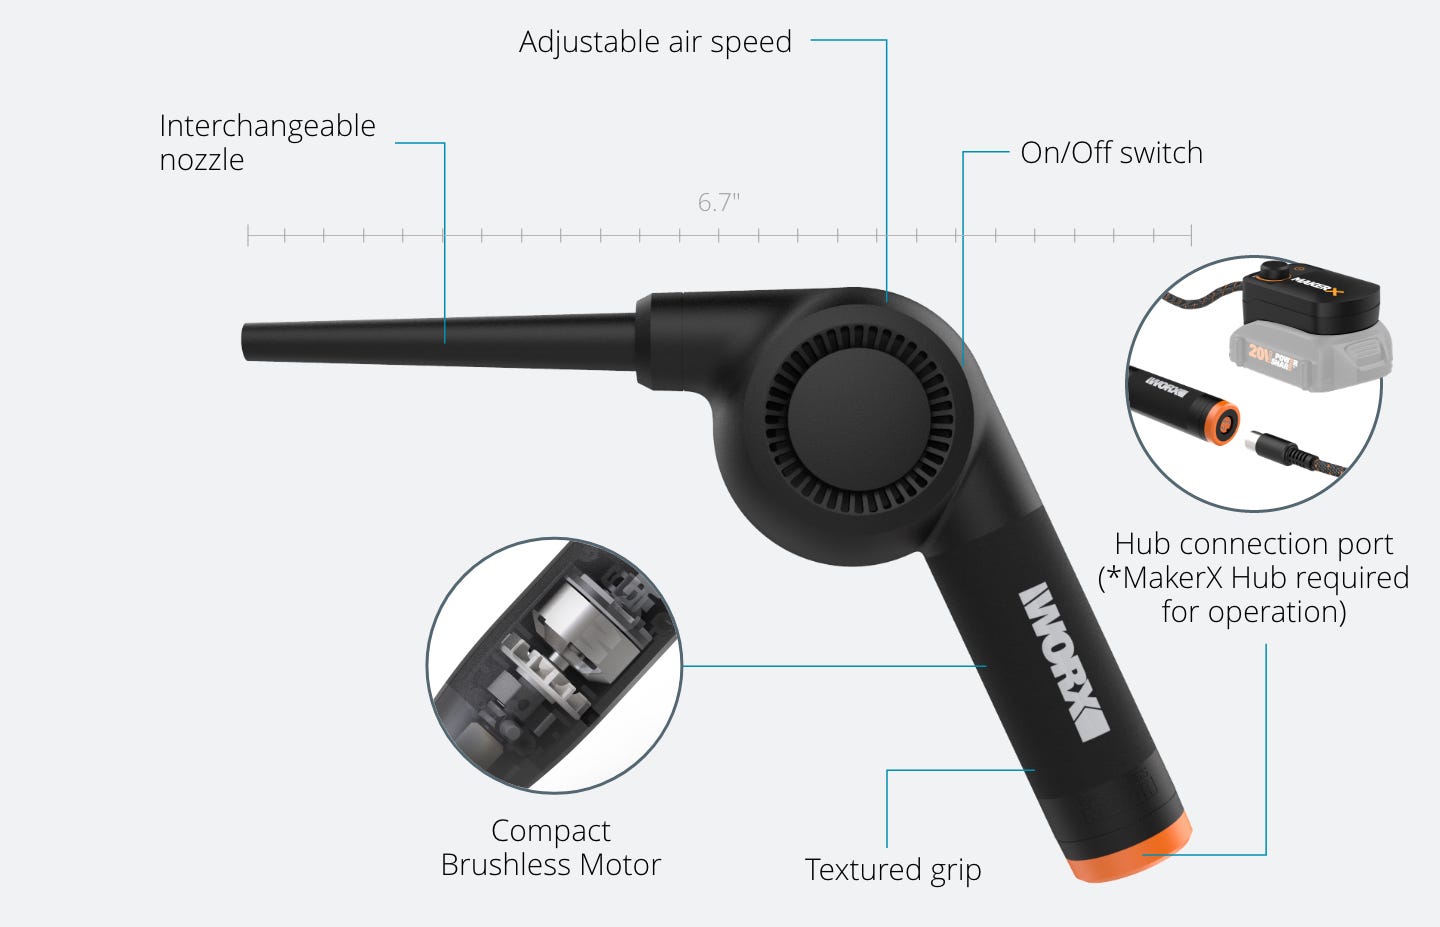 MakerX Mini Blower featuring: adjustable air speed, interchanheable nozzle, on/off switch, compact brushless motor, textured grip, Hub connection port 